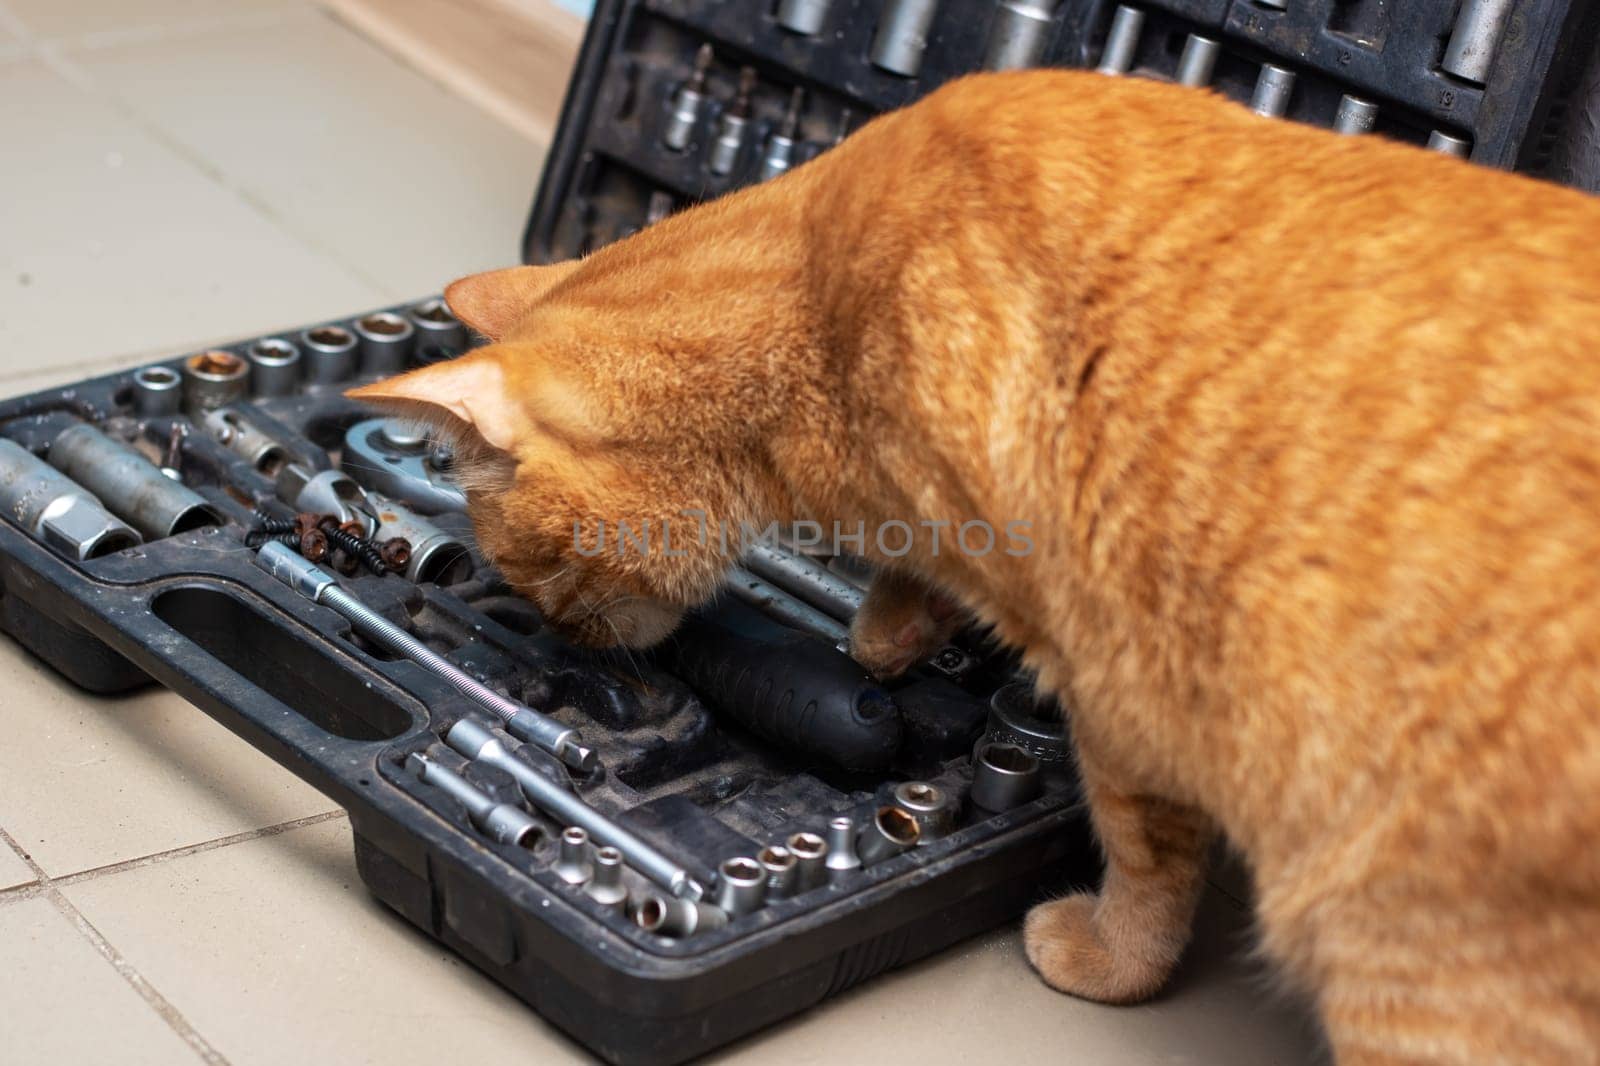 Feline using whiskers to explore gadgets in toolbox by Vera1703